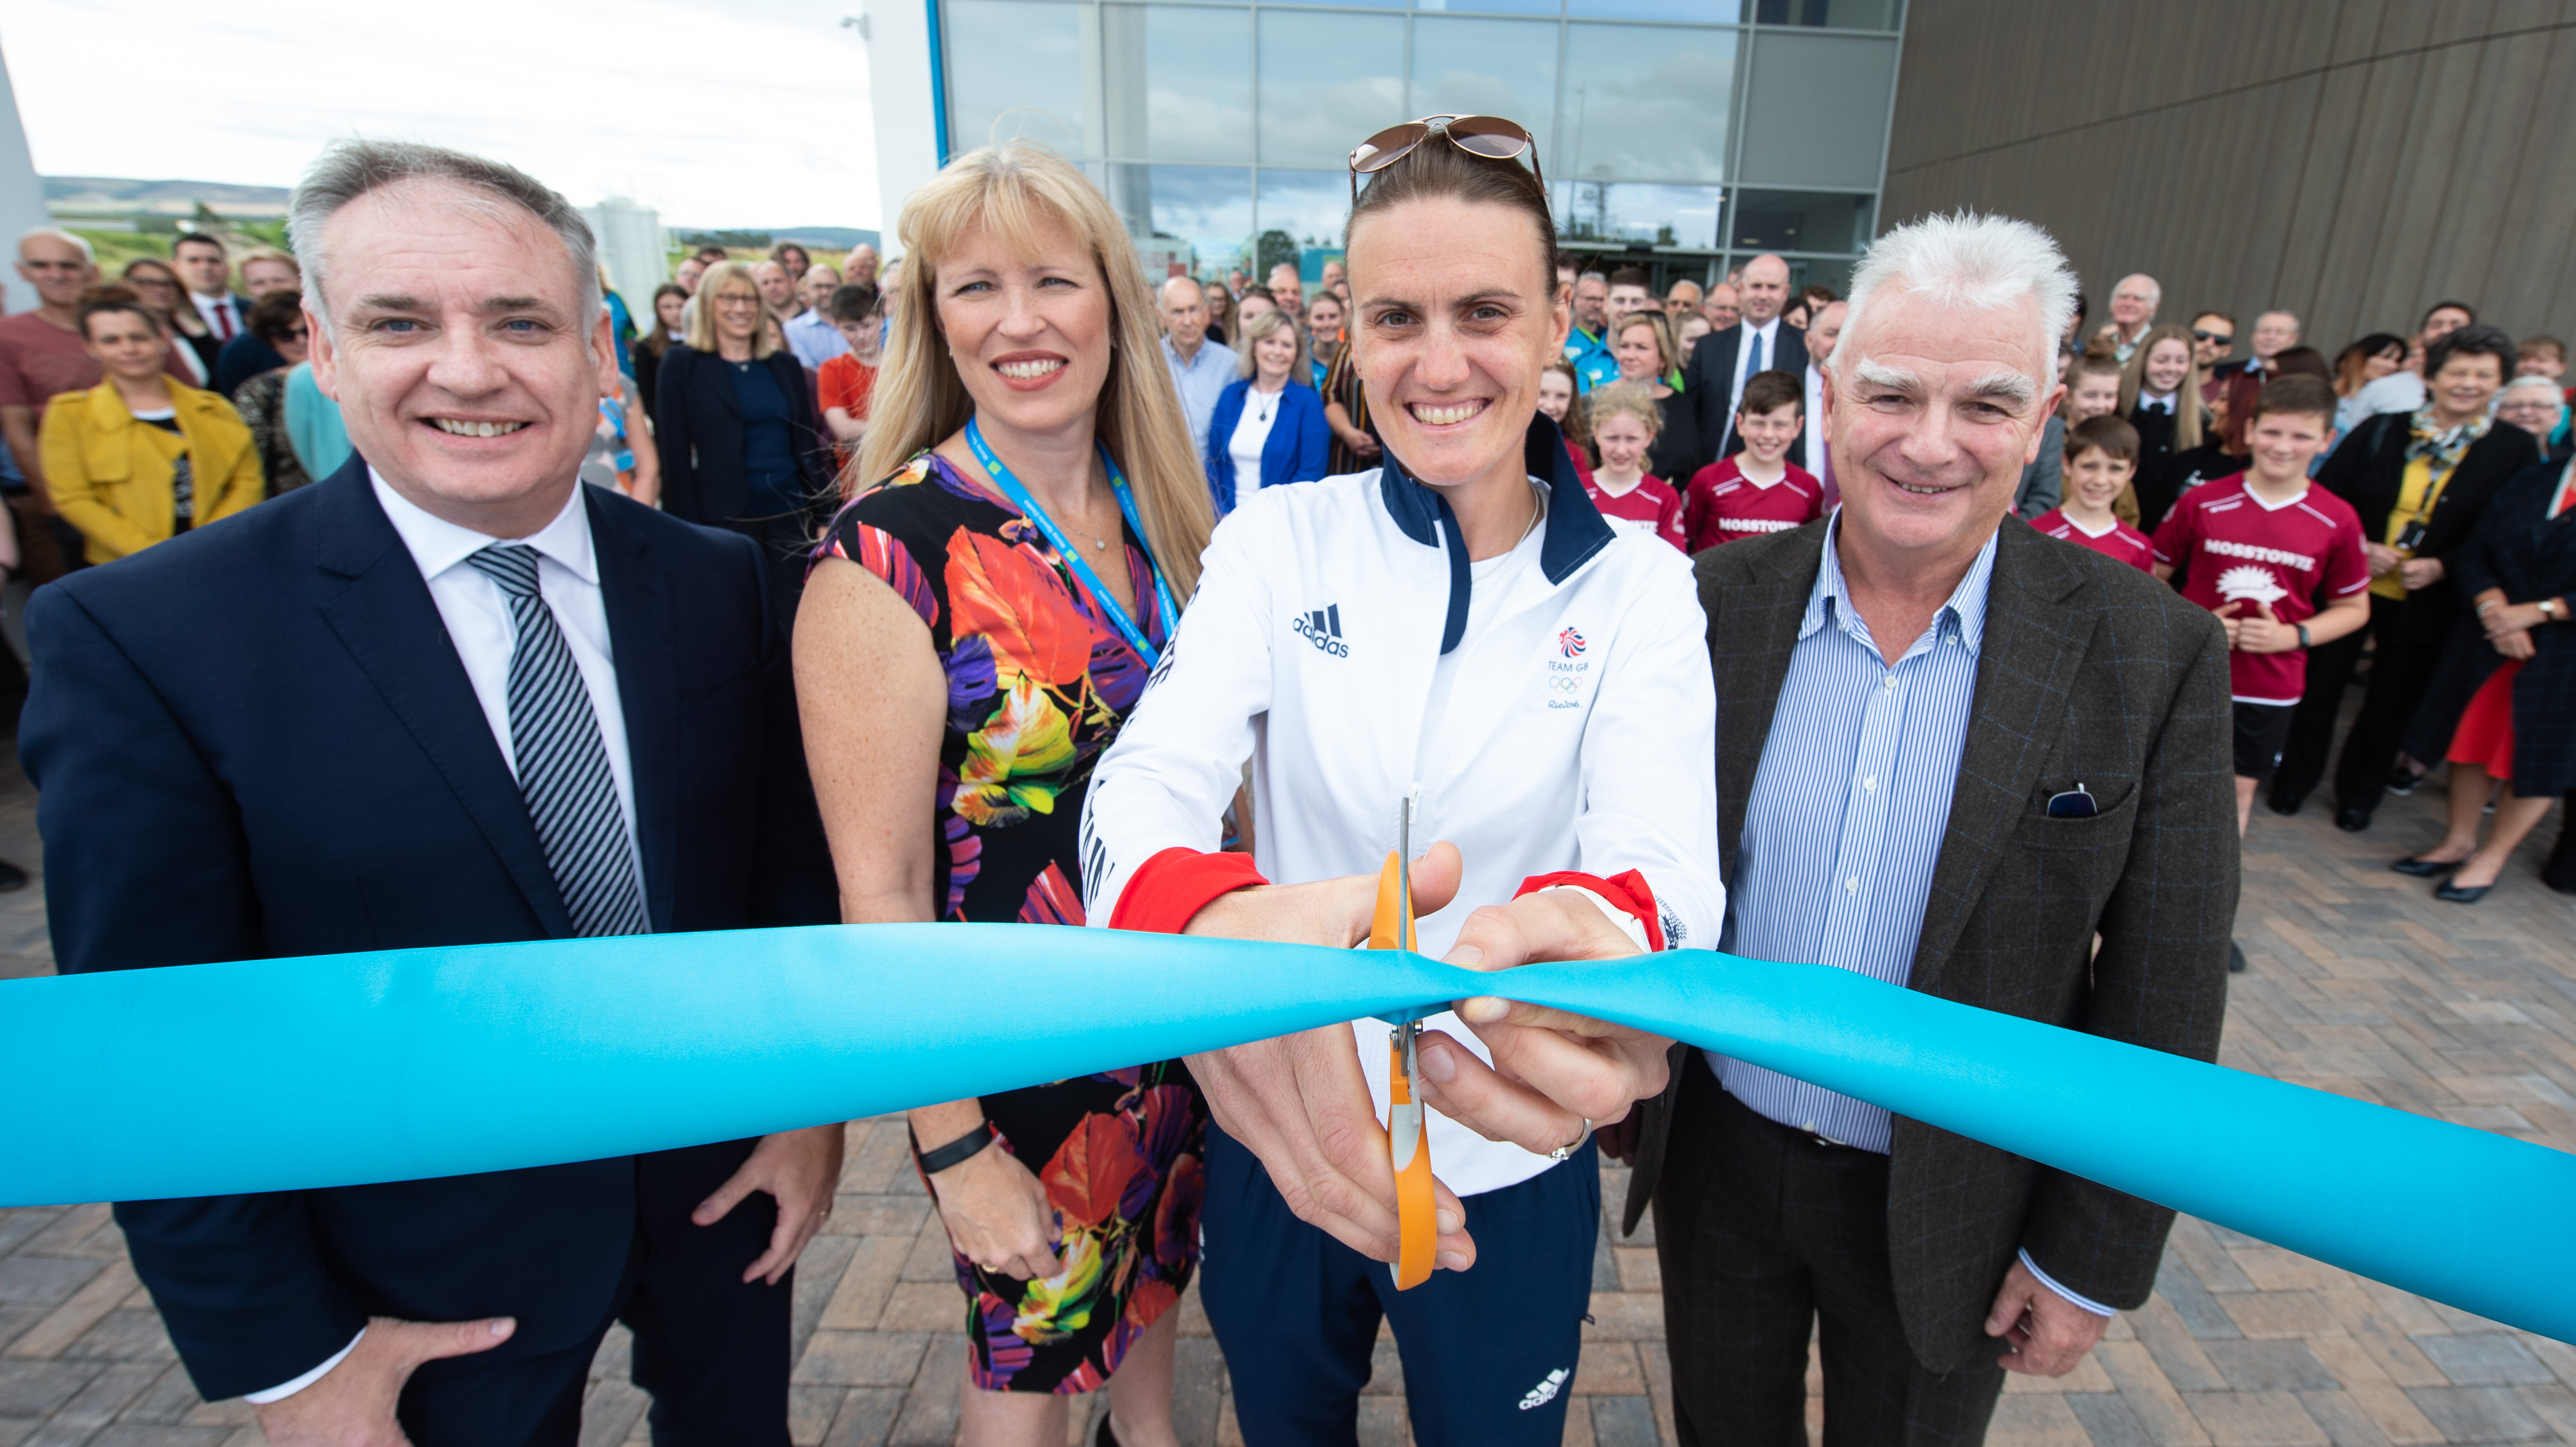 Double Olympic gold medallist rower Heather Stanning officially opens new Moray Sports Centre while meeting school pupils and challenging people to go head-to-head with her on rowing machine. Picture by Jason Hedges